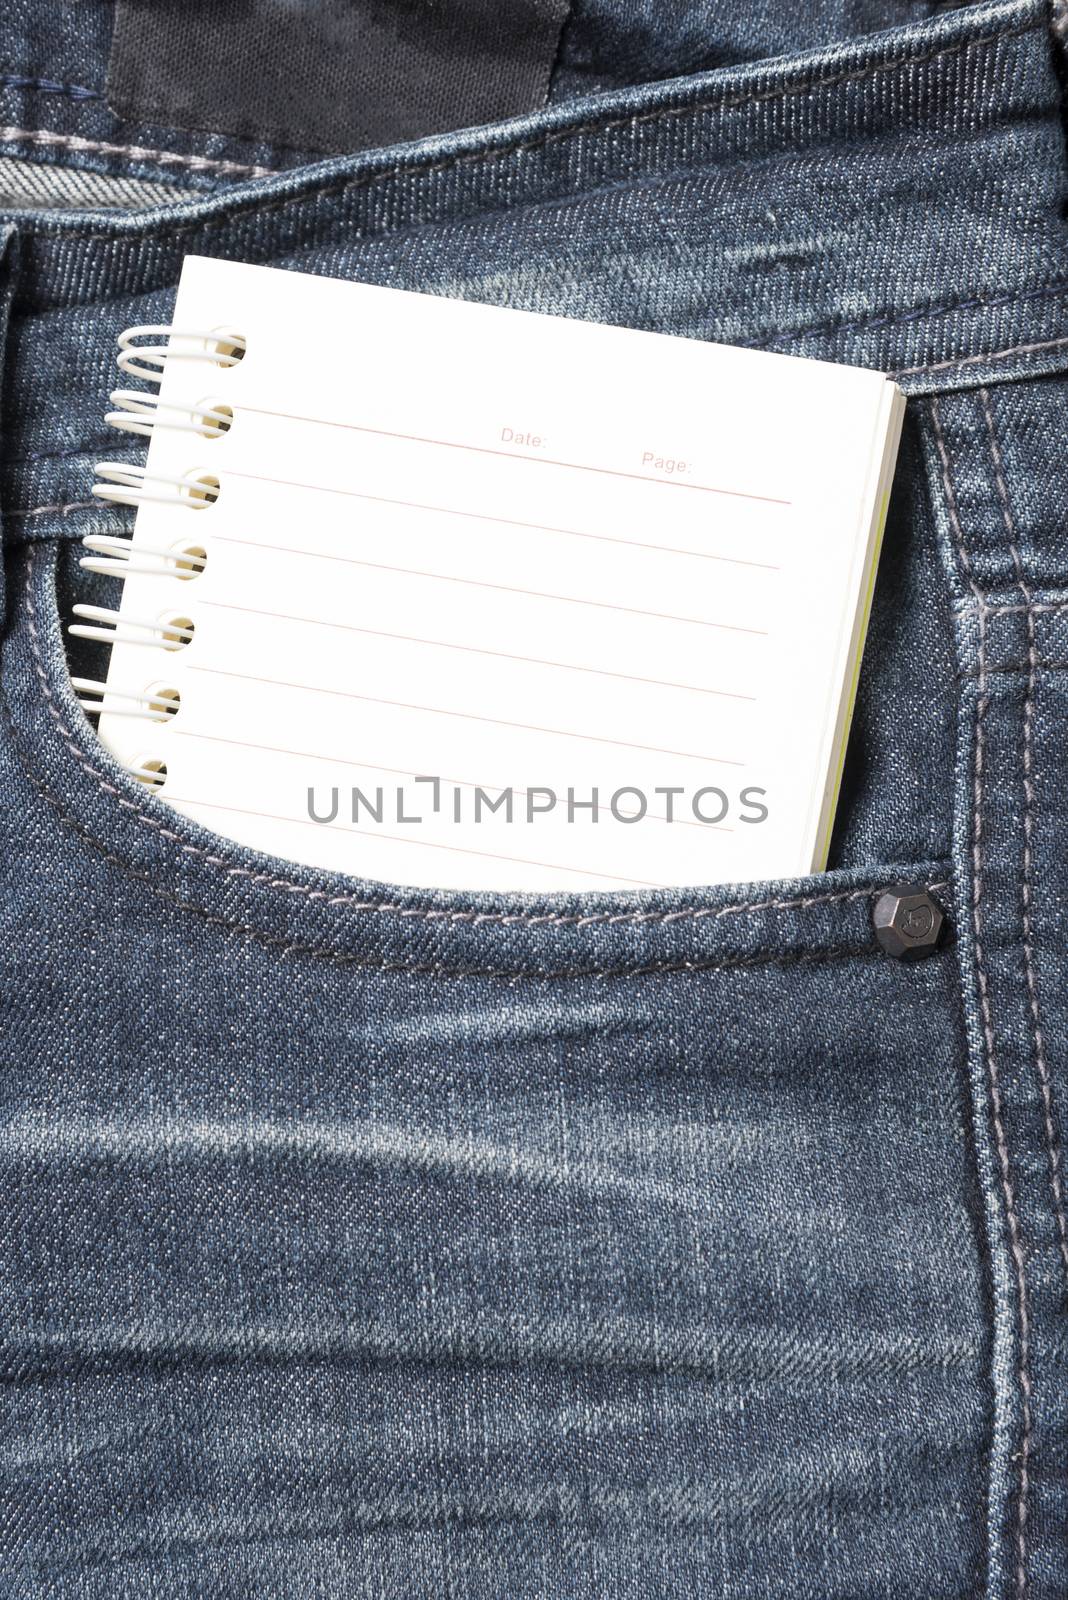 notebook paper in jean pocket by ammza12